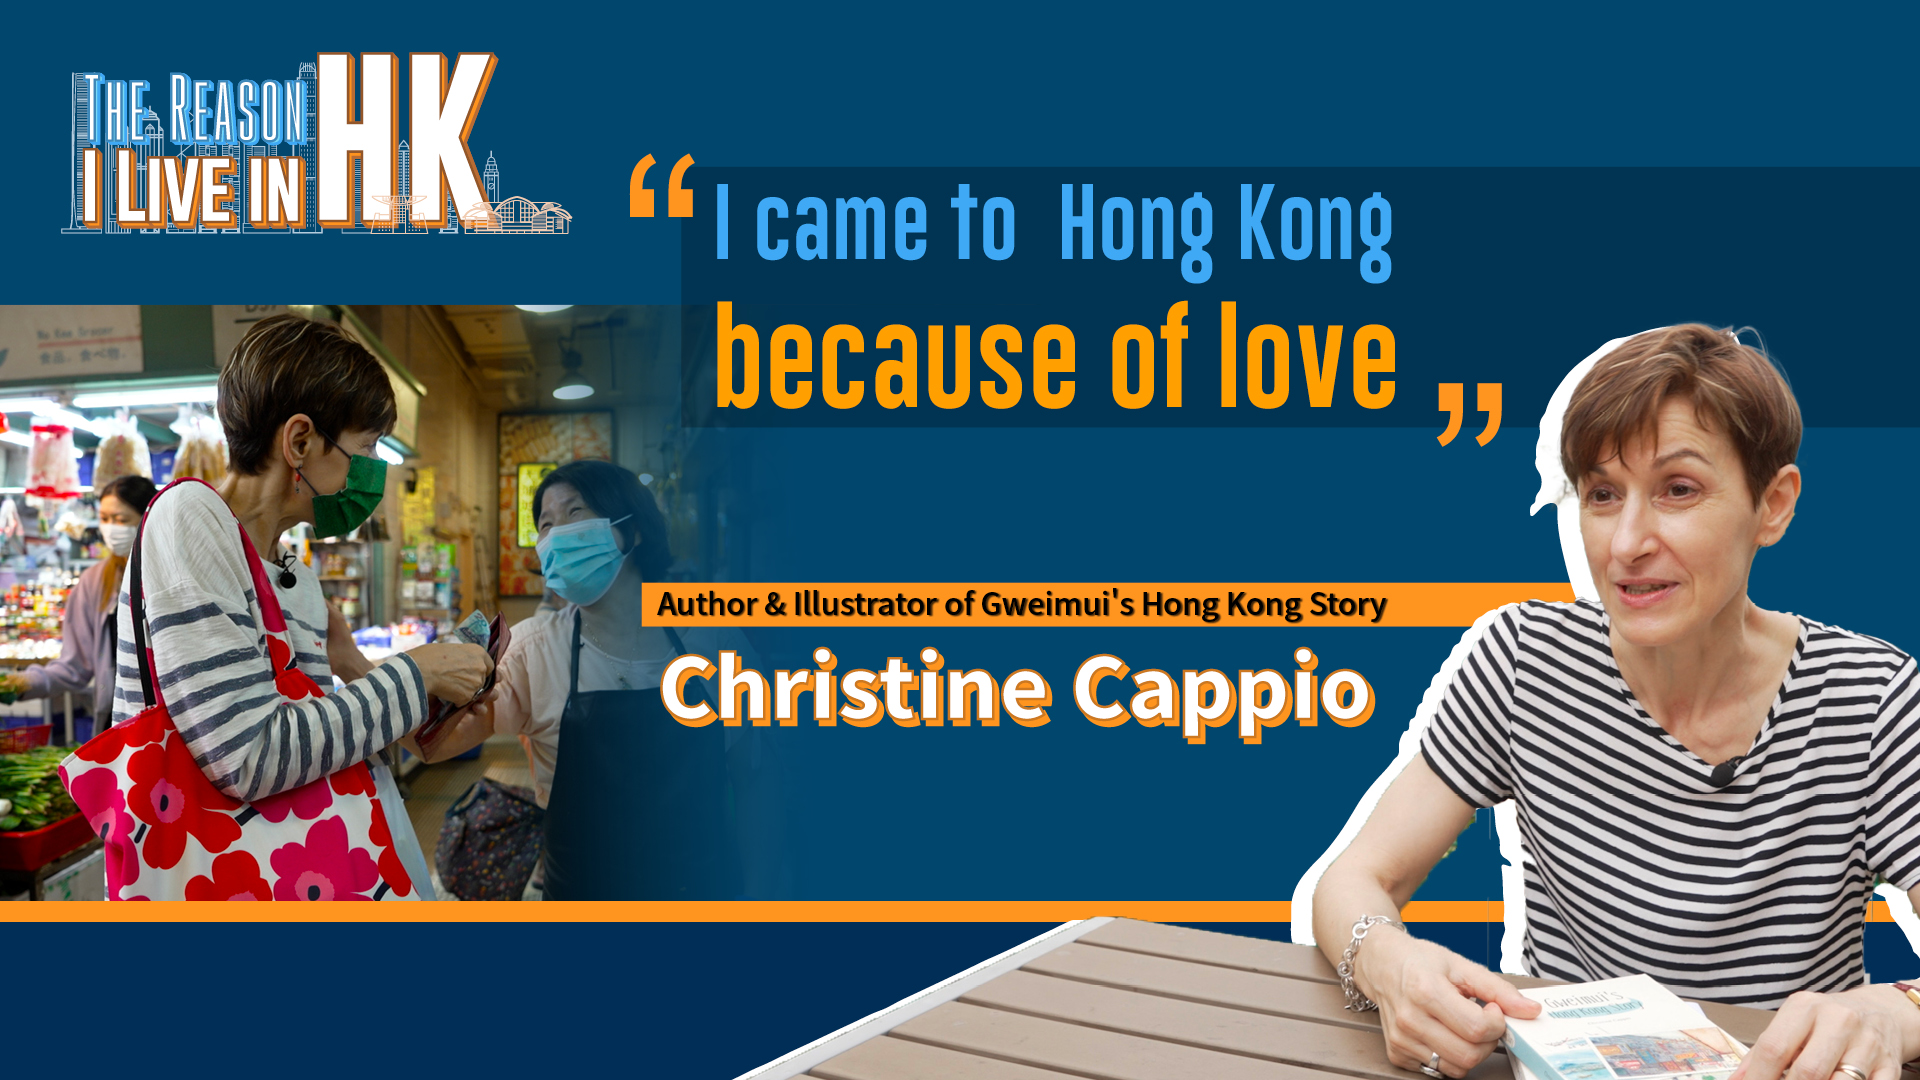 The-Reason-I-Live-in-HK｜Being-a-French-Gweimui-in-Hong-Kong：＂I-came-here-because-of-love＂